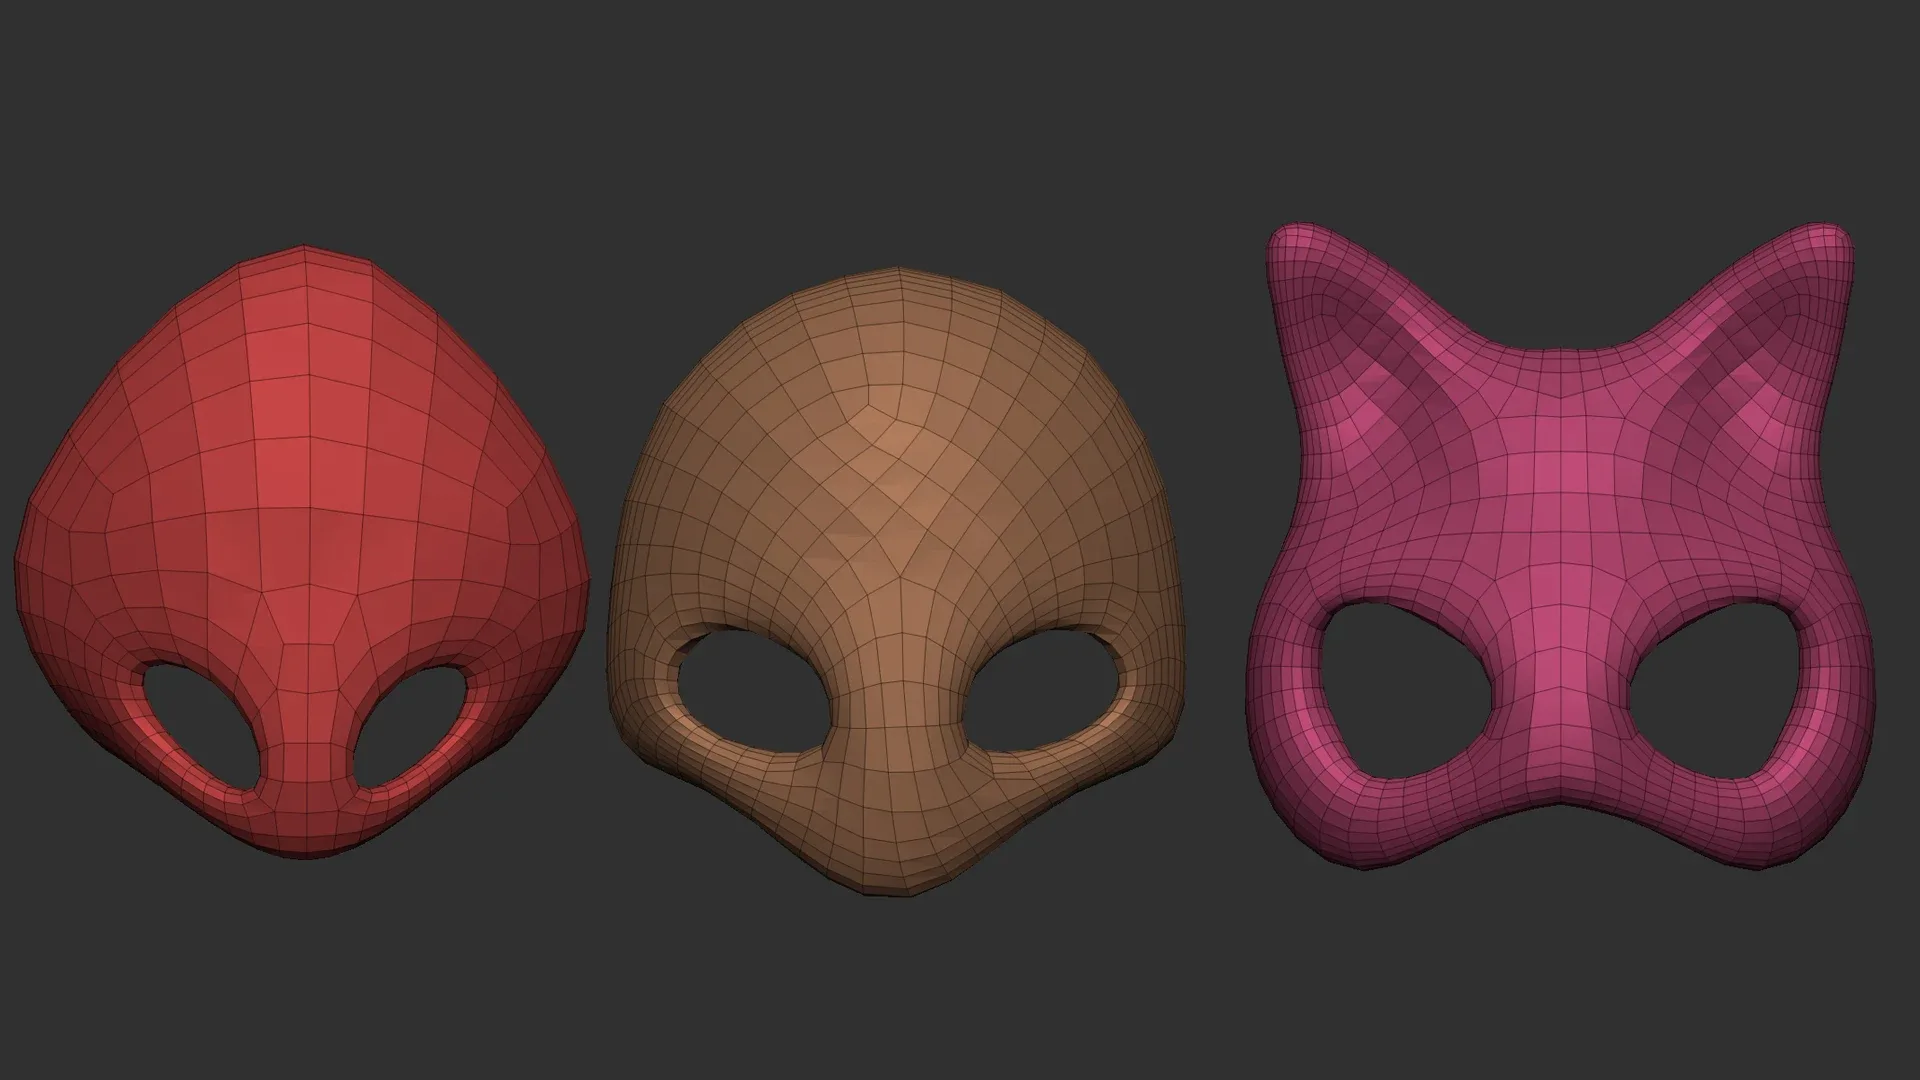 50 low poly mask shapes and base meshes IMM brush set for Zbrush, OBJ and FBX (2020 version) files.